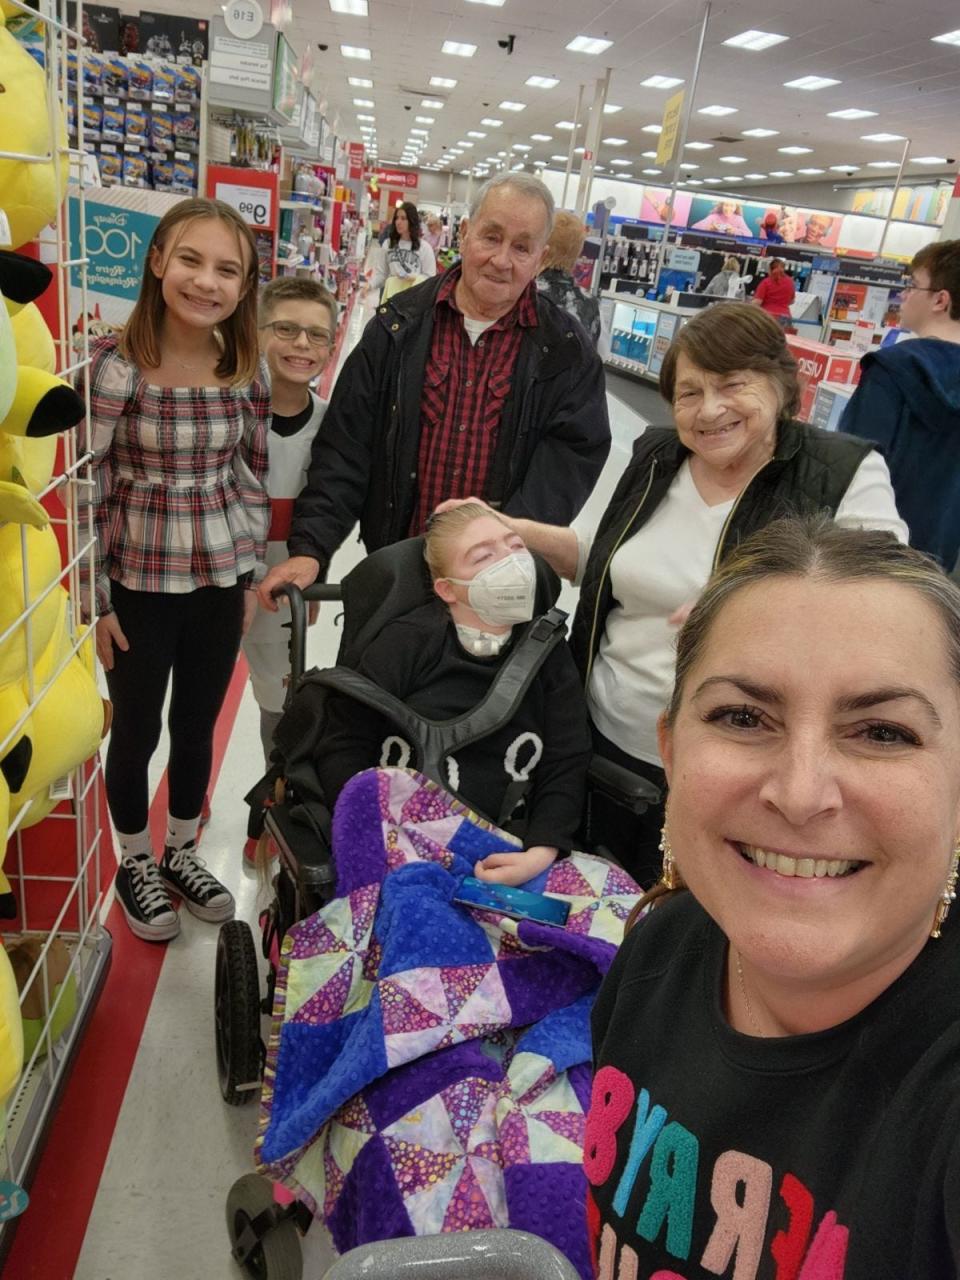 Stephanie Snee, right, and her children accompanied Marvin and Lori Penrod and Marissa Anderegg on a shopping trip to Target after the family acquired a wheelchair-accessible van for Marissa with funds Snee helped to raise through the Foundation for Community Betterment.